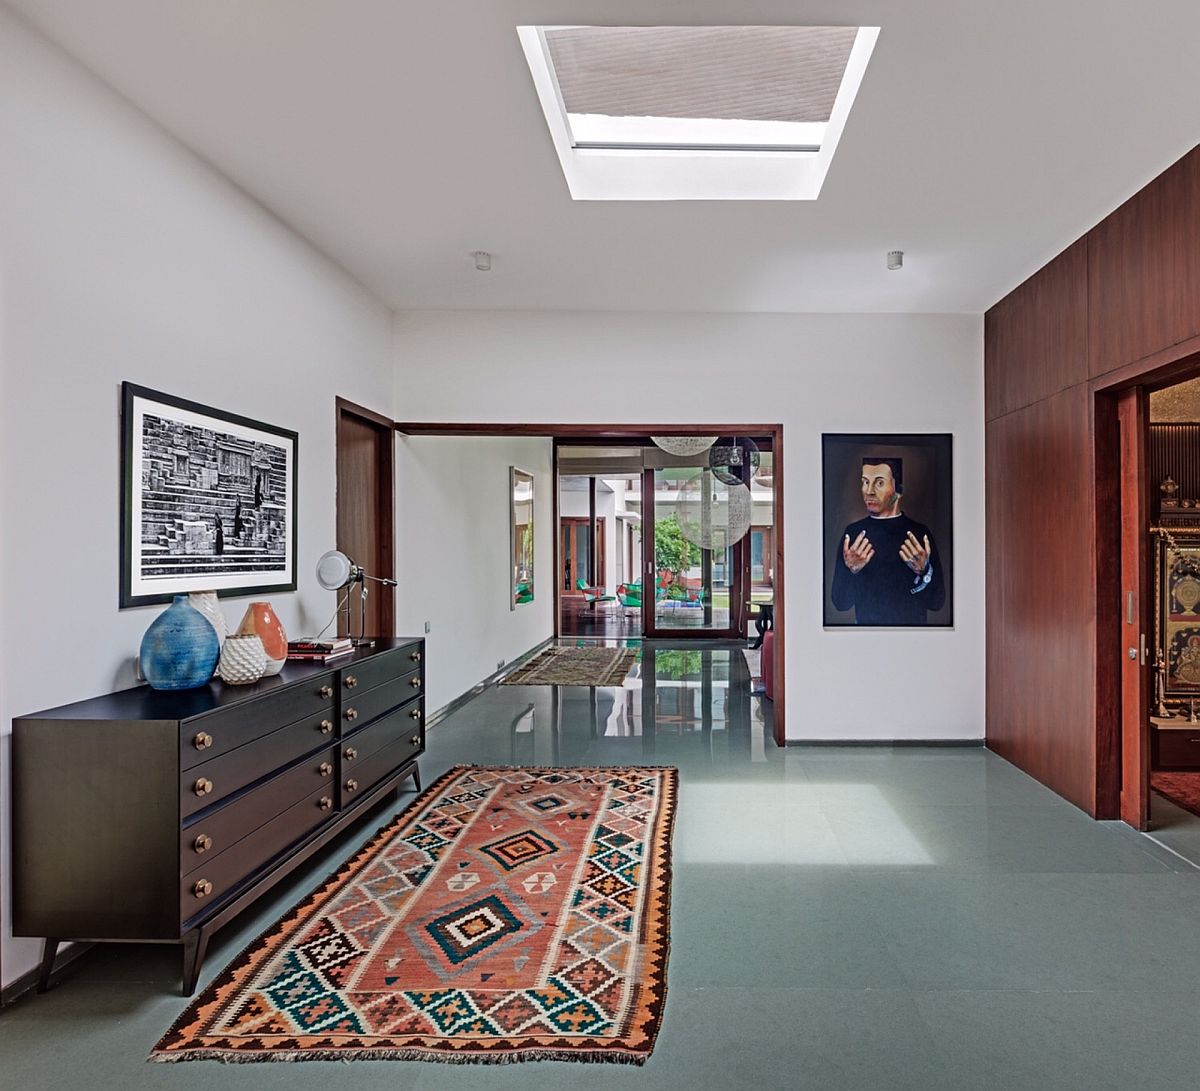 Skylight, traditional rugs and cool decor create a relaxing and light-filled interior